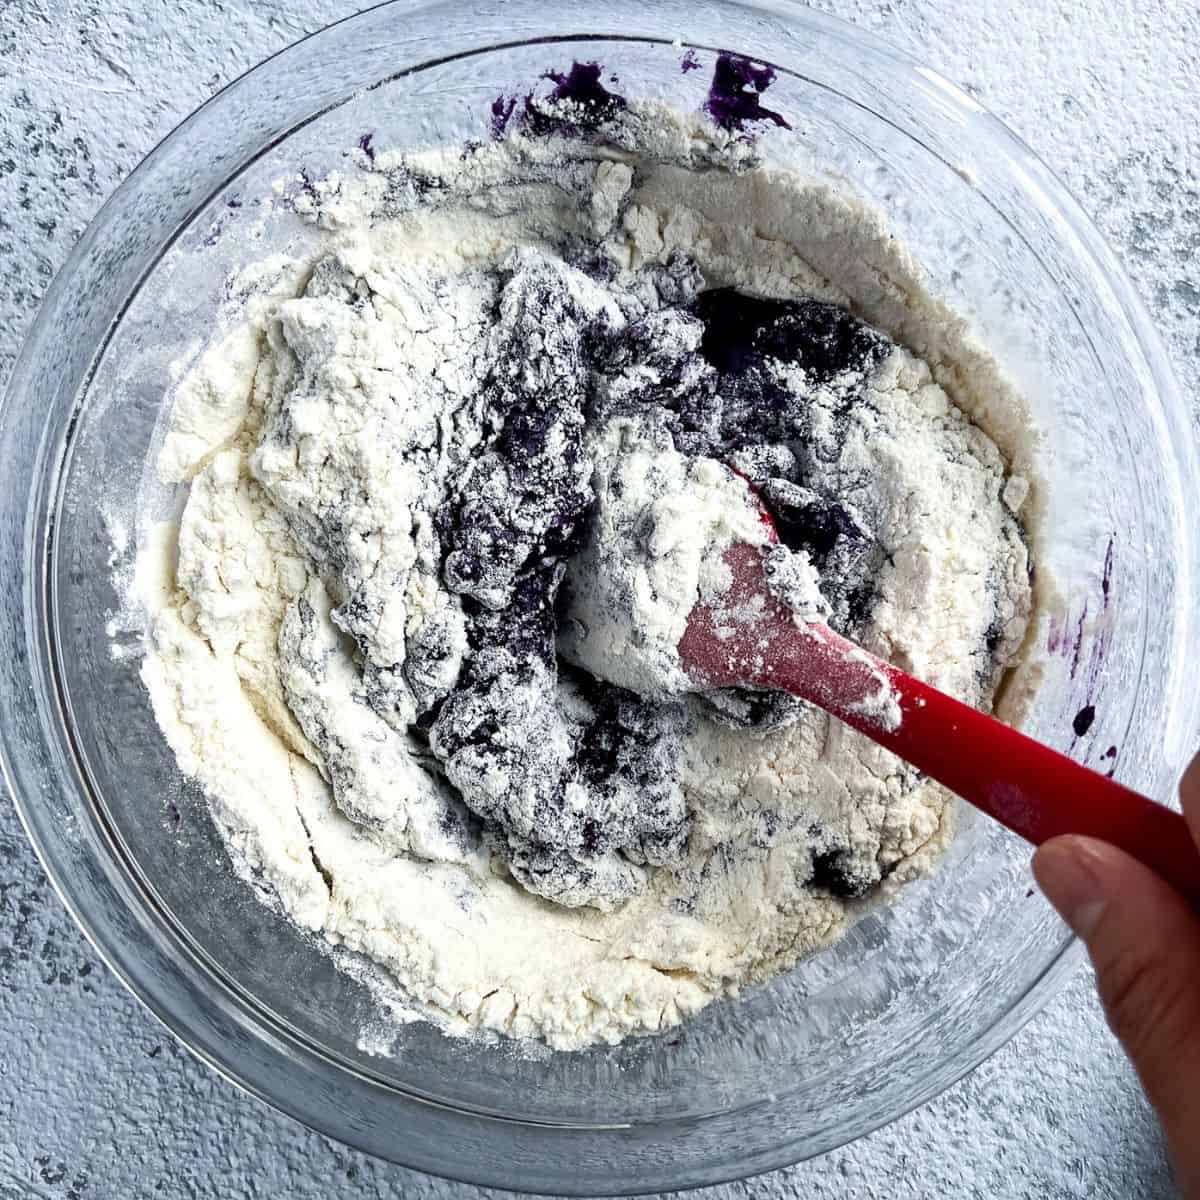 Combining dry and wet ingredients to make an ube cookie dough.